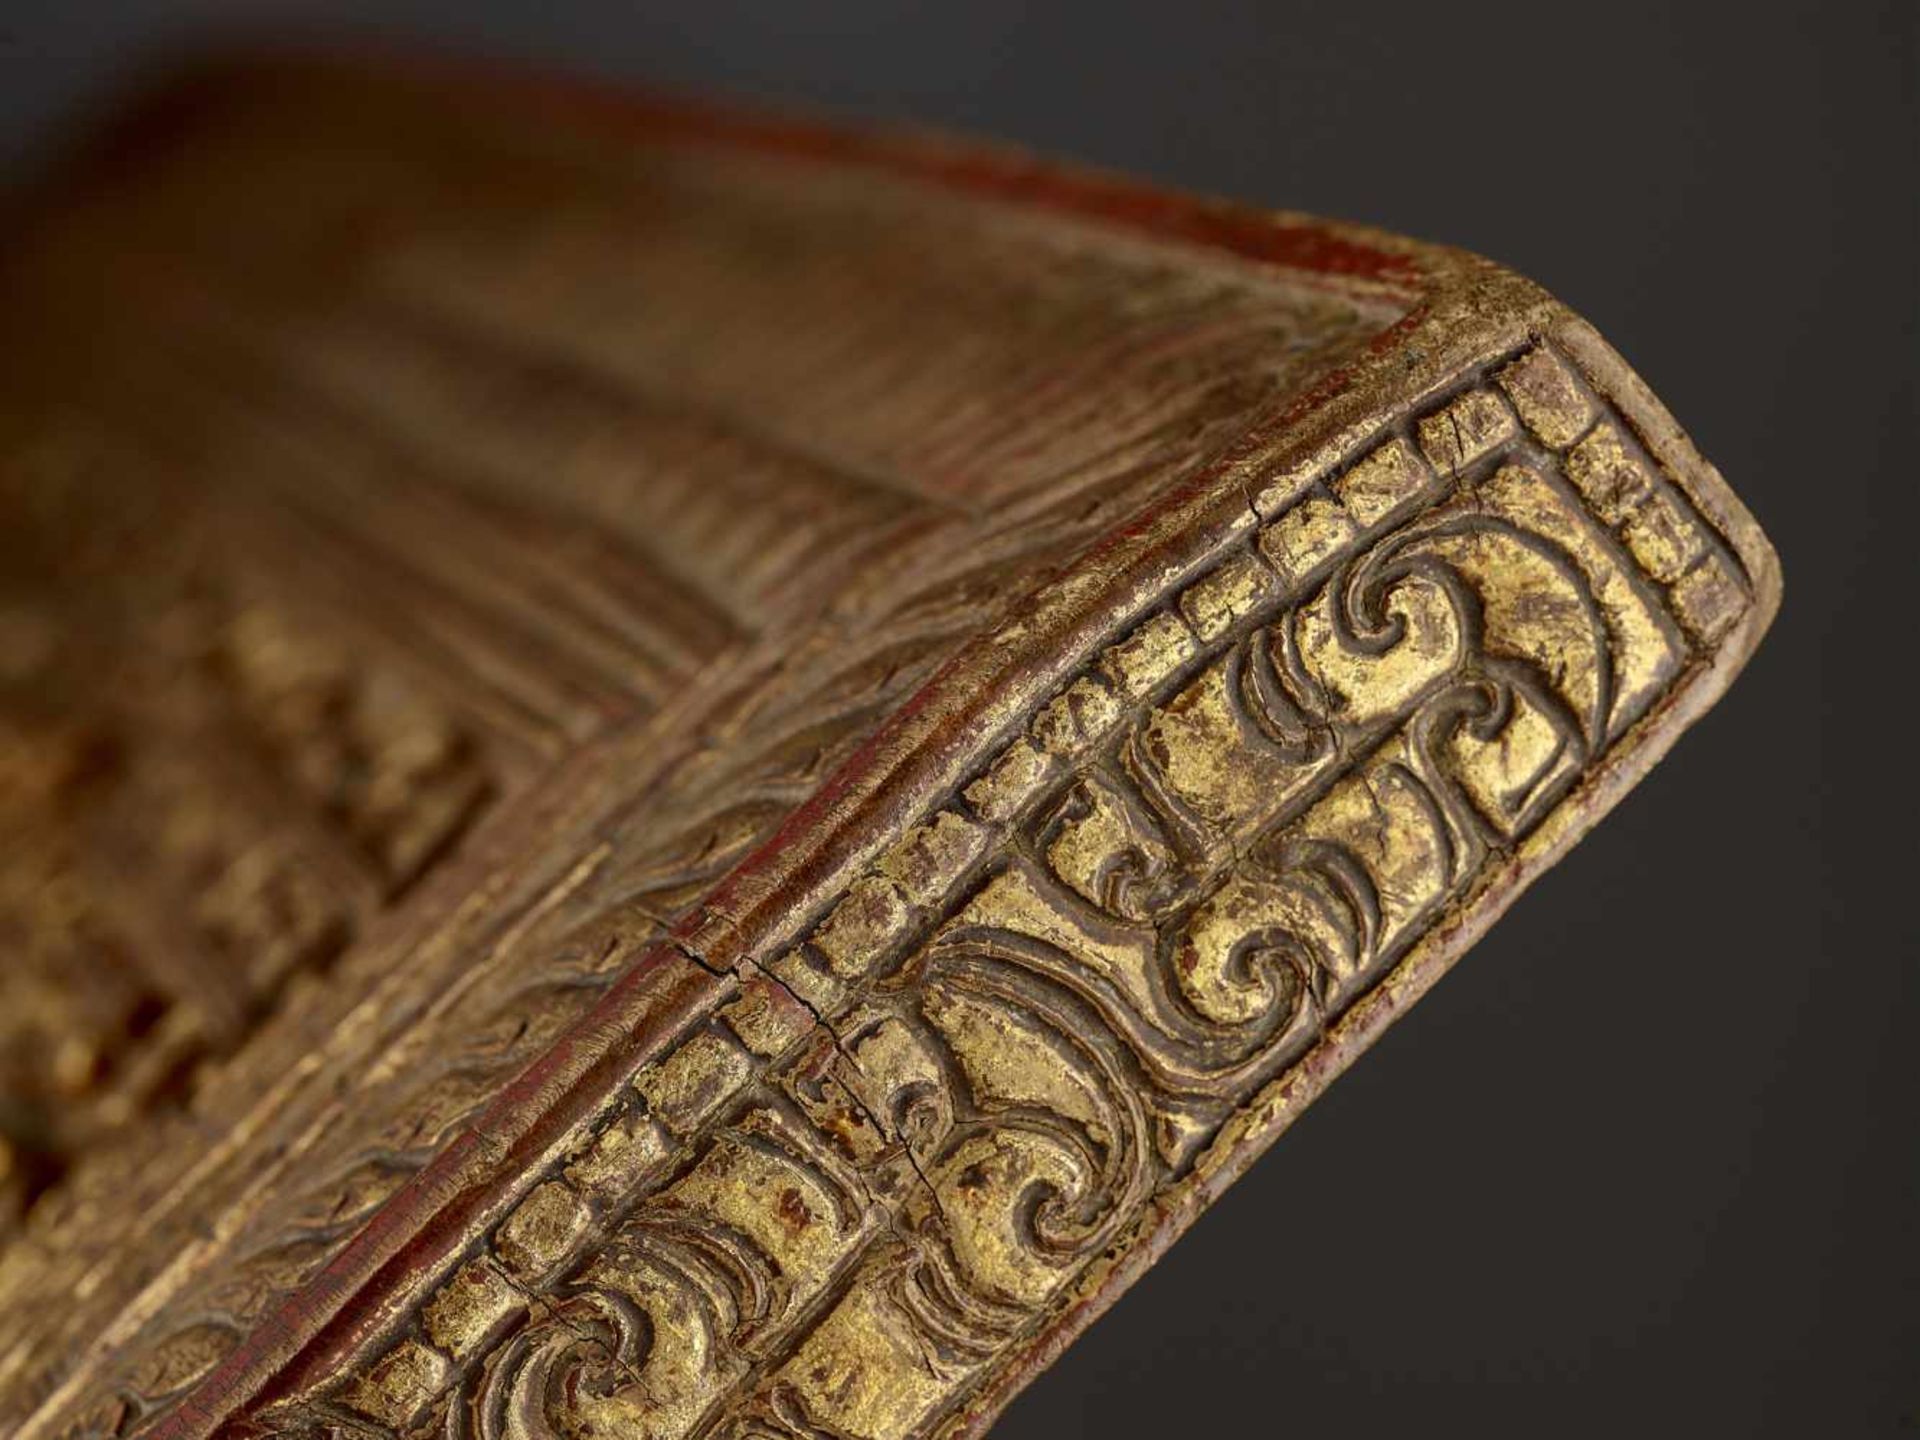 A RARE MANUSCRIPT COVER 17TH CENTURY Tibet, 17th - earlier 18th century. The finely carved and - Image 4 of 5